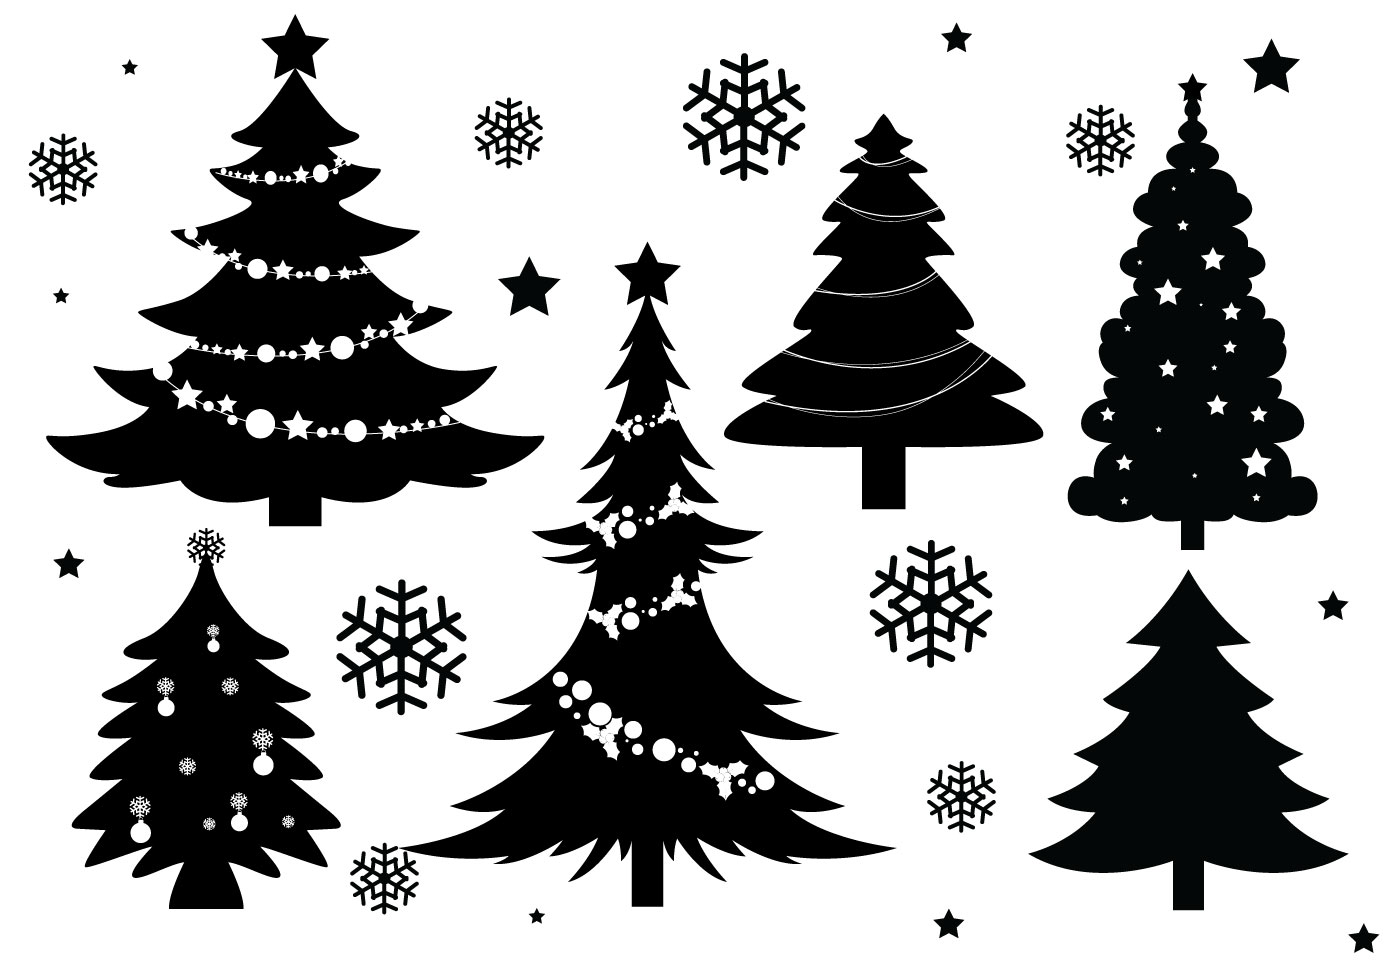 free vector holiday clipart - photo #27